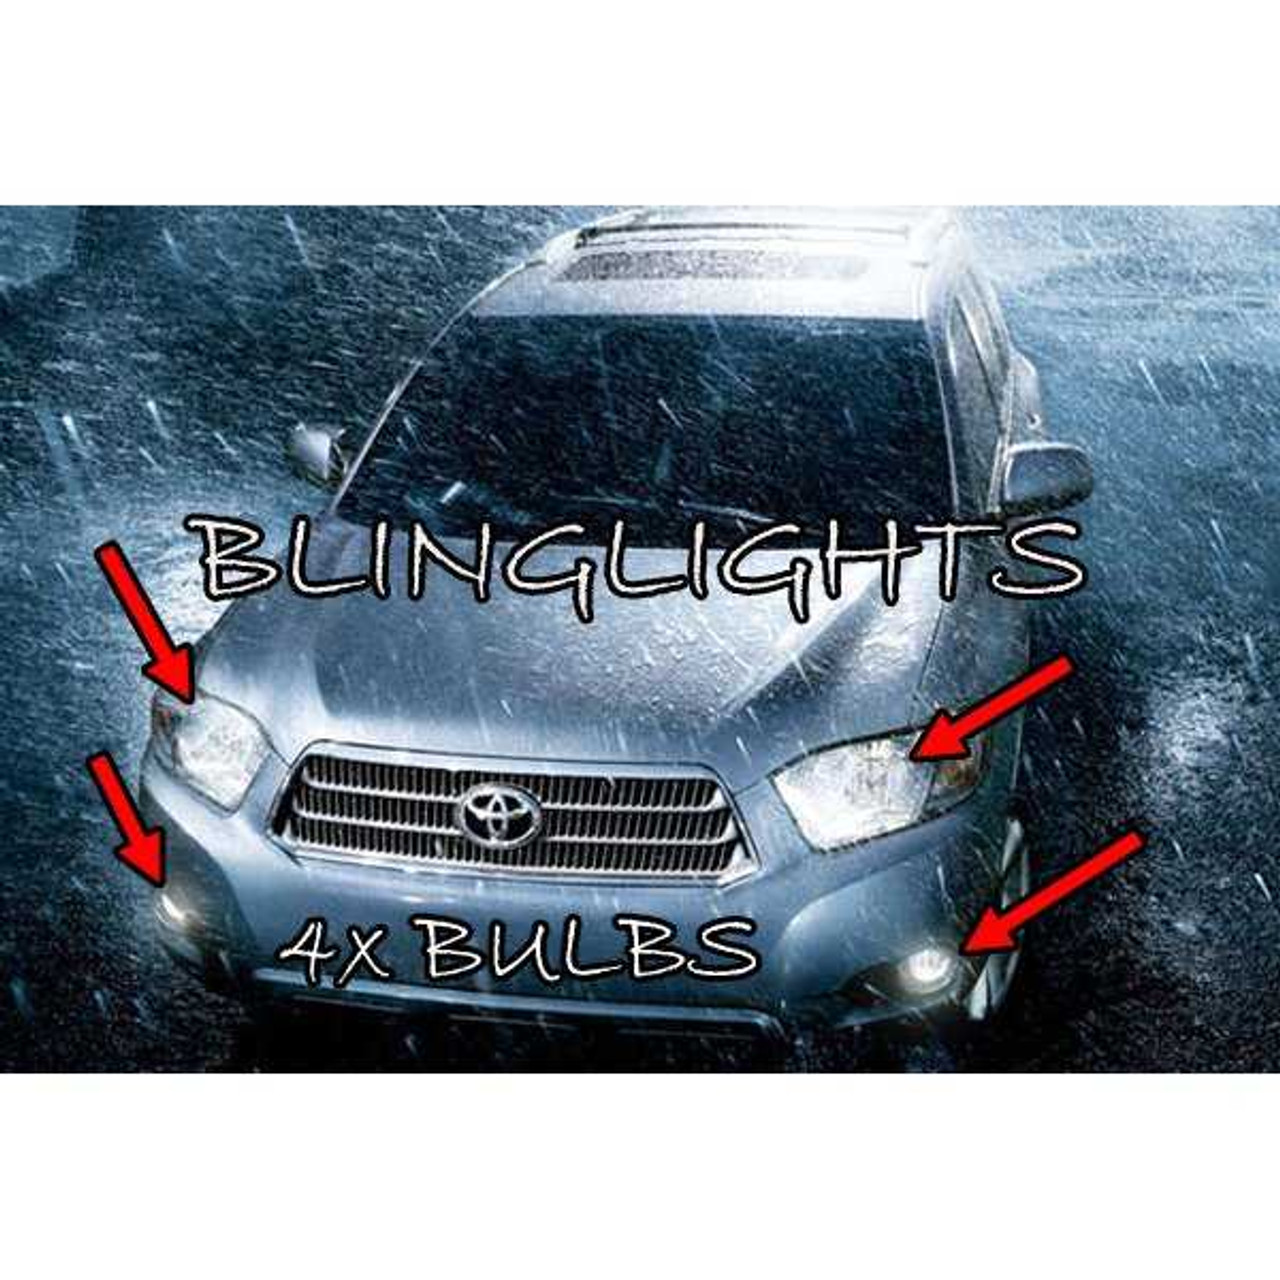 Toyota Kluger 4x Bright White Upgrade Light Bulbs for OEM Headlamps and Foglamps Head Fog Lamps